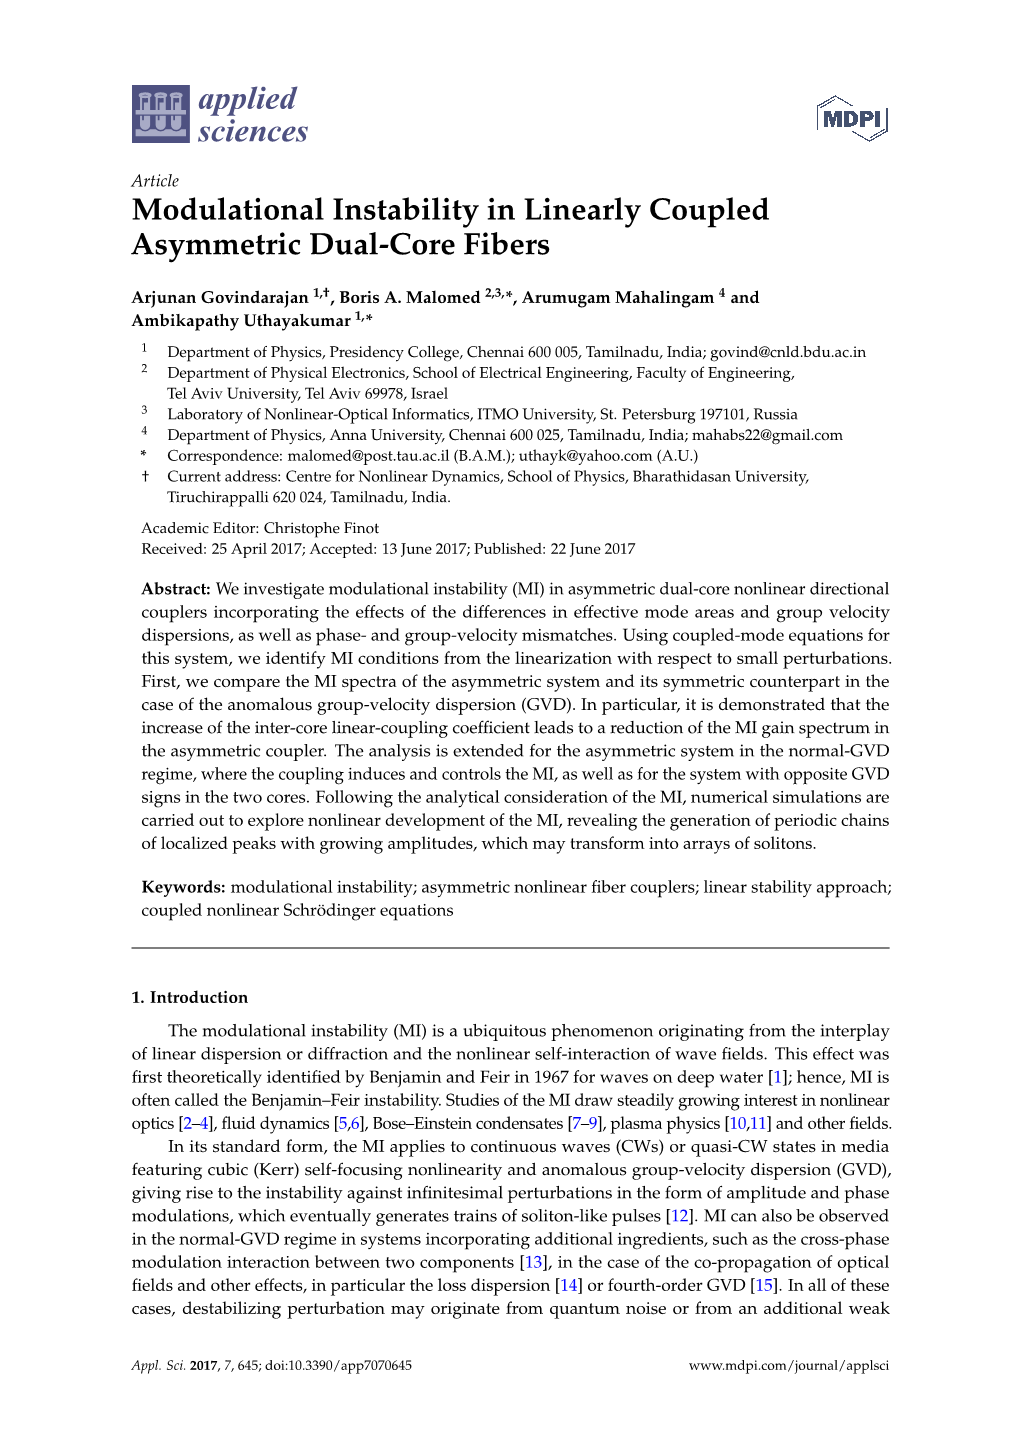 Modulational Instability in Linearly Coupled Asymmetric Dual-Core Fibers